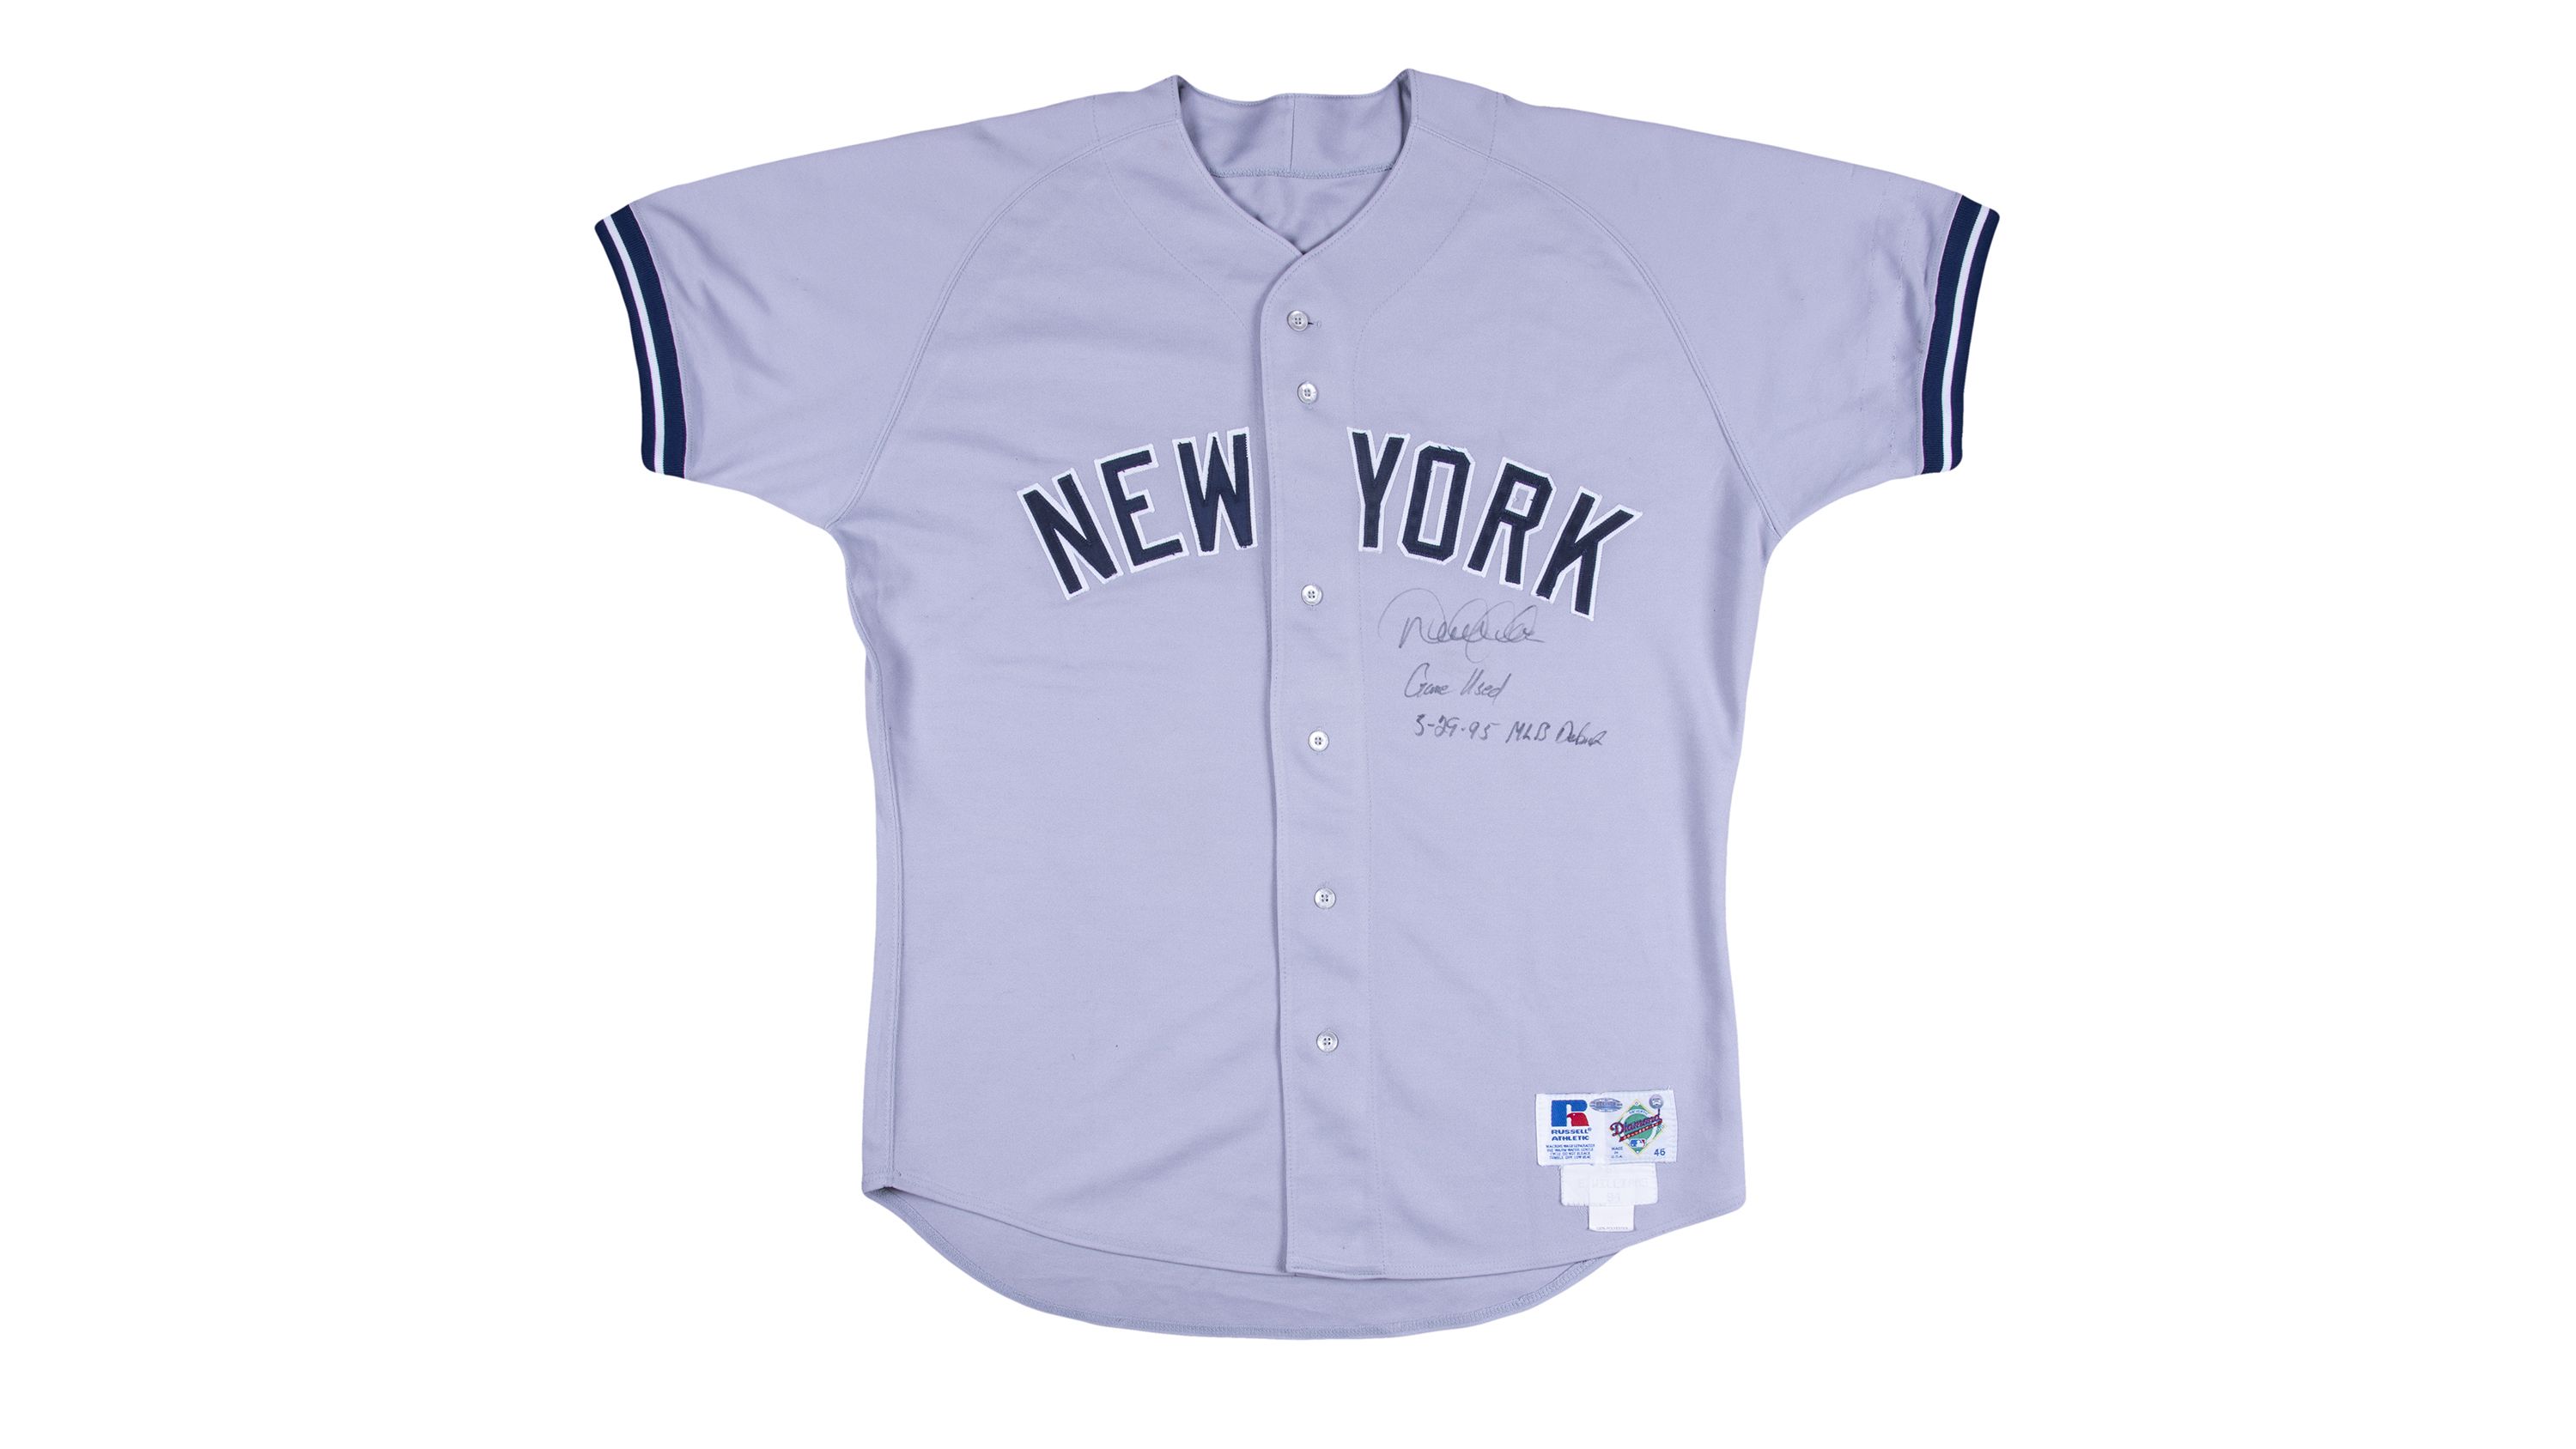 Sell or Auction Your Derek Jeter Game Worn Signed Yankees Jersey